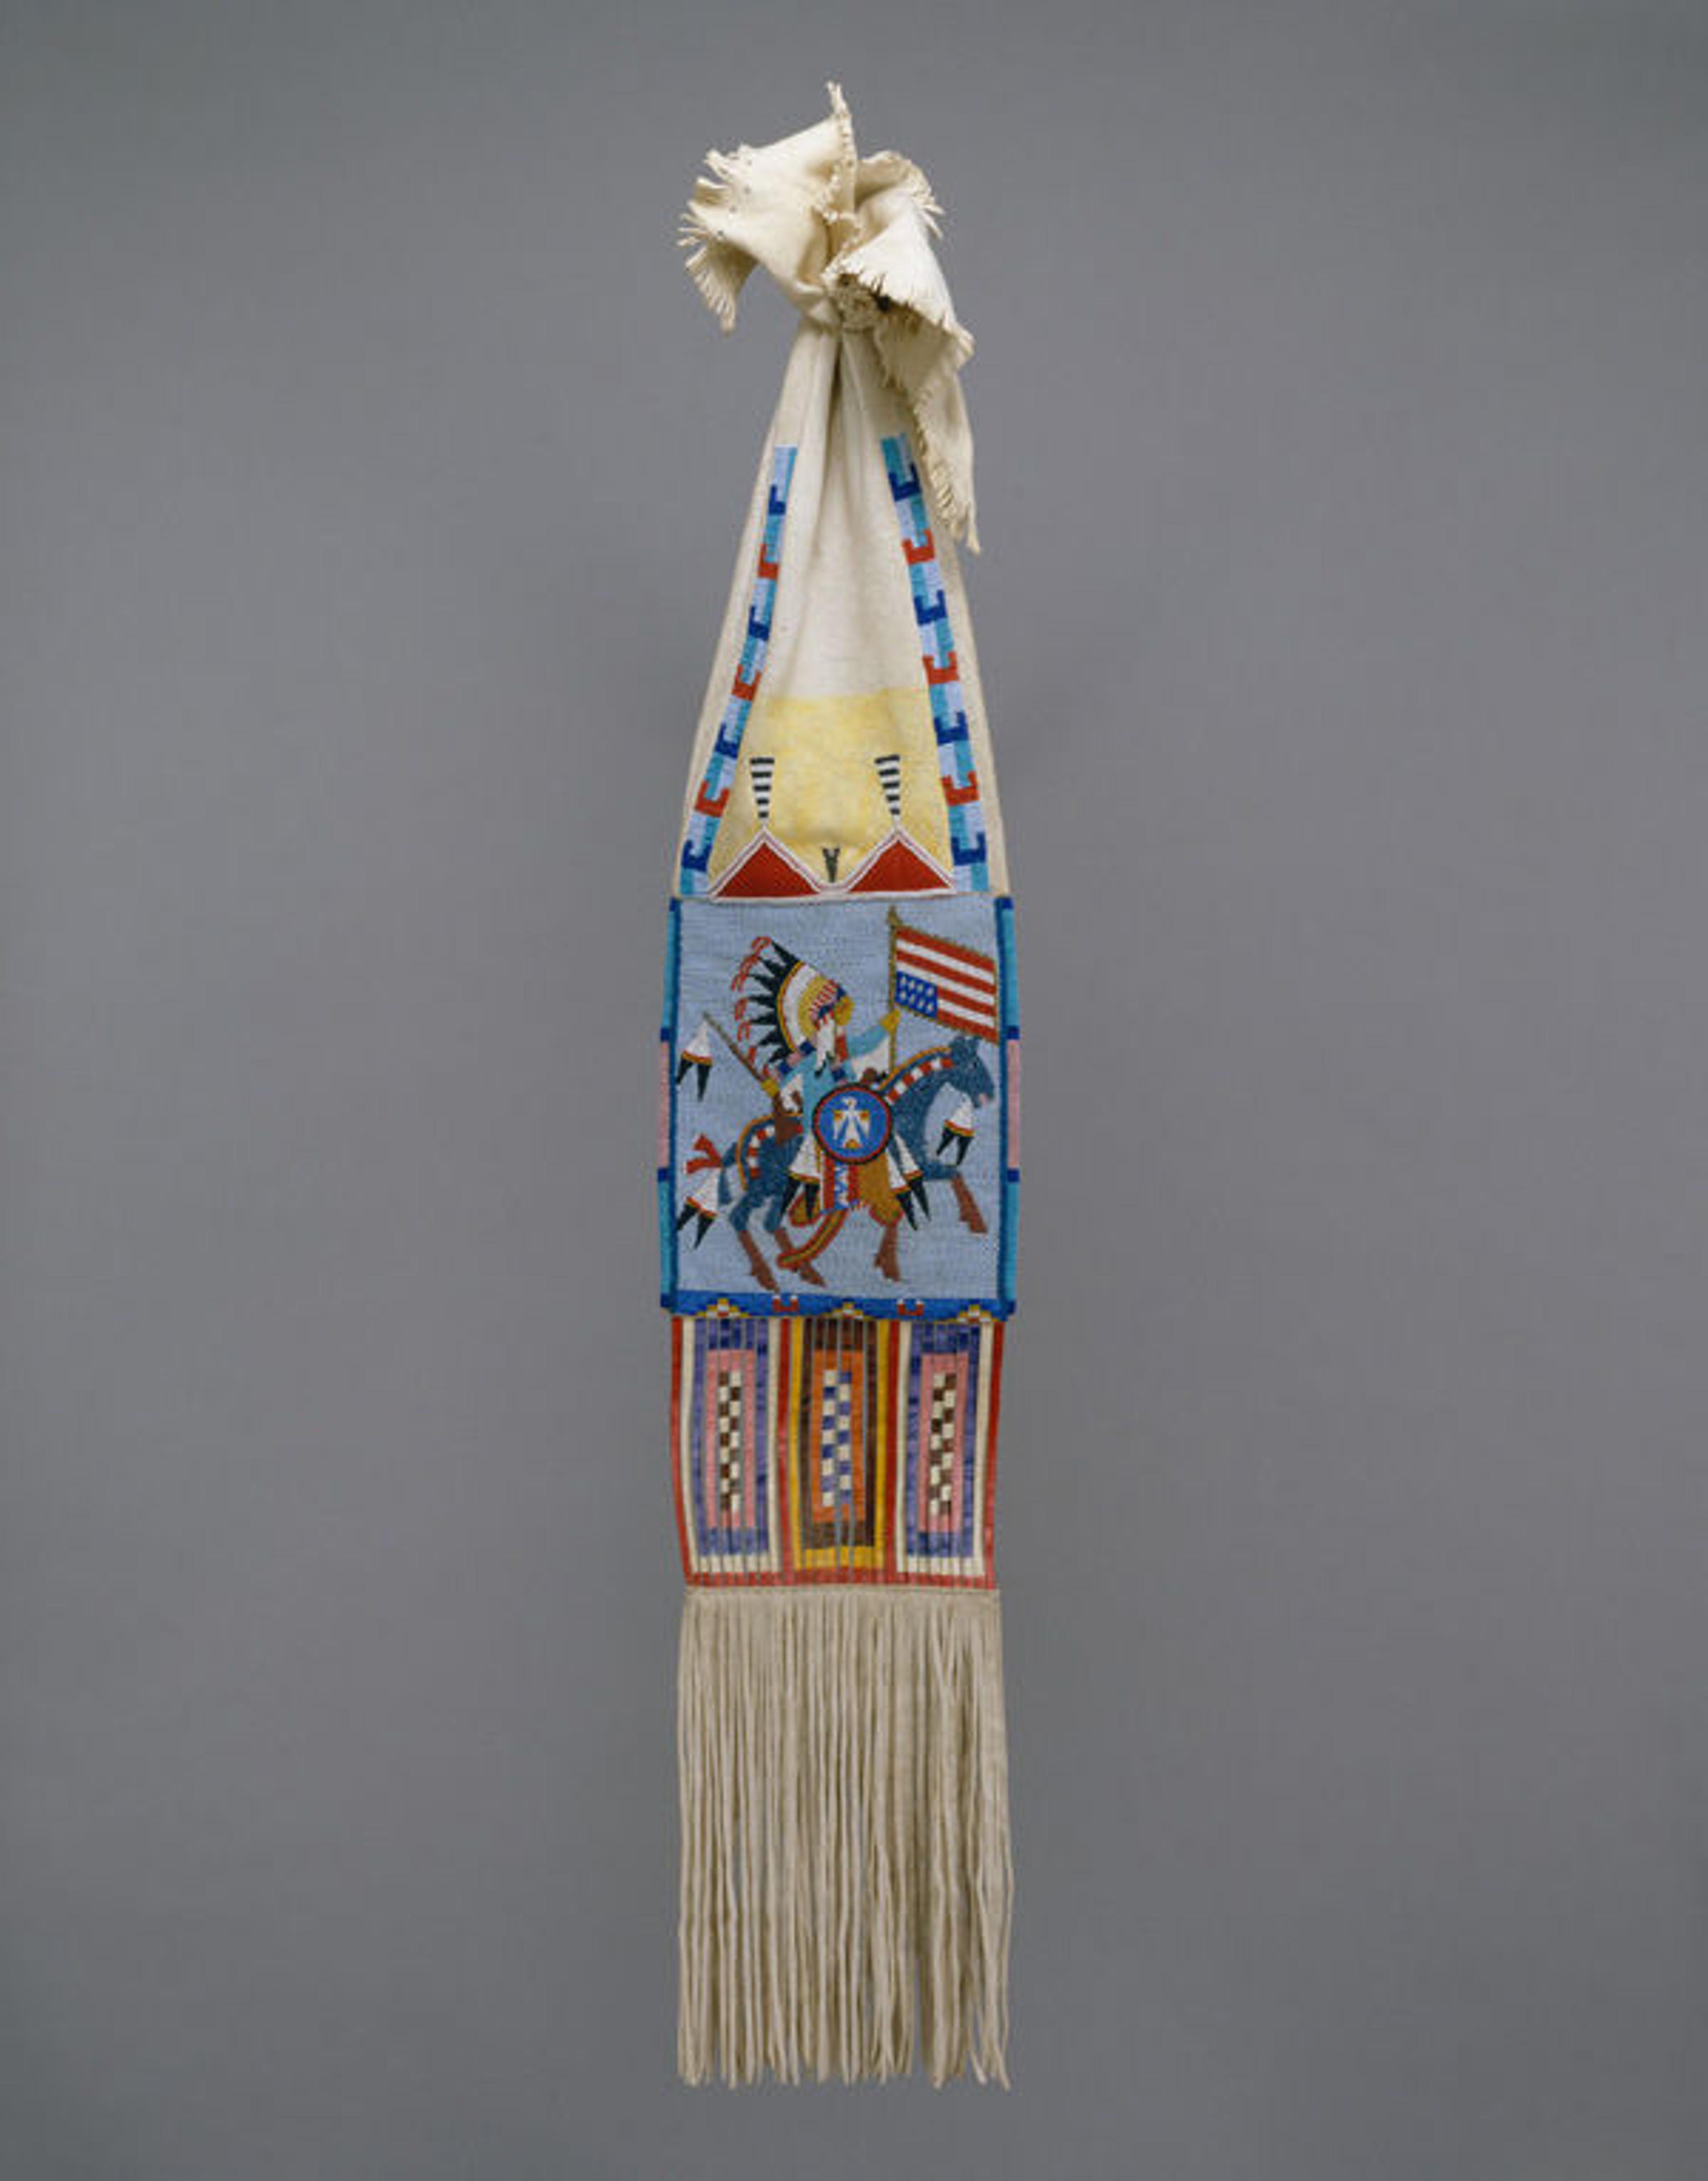 Joyce Growing Thunder Fogarty (Native American, born 1950). Tobacco Bag, 1977. United States, Montana. Assiniboine or Sioux. Native-tanned deerskin, pigment, glass, quill, cloth; H. 40 x W. 8 in. (101.6 x 20.3 cm). The Metropolitan Museum of Art, New York, Ralph T. Coe Collection, Gift of Ralph T. Coe Foundation for the Arts, 2011 (2011.154.12)